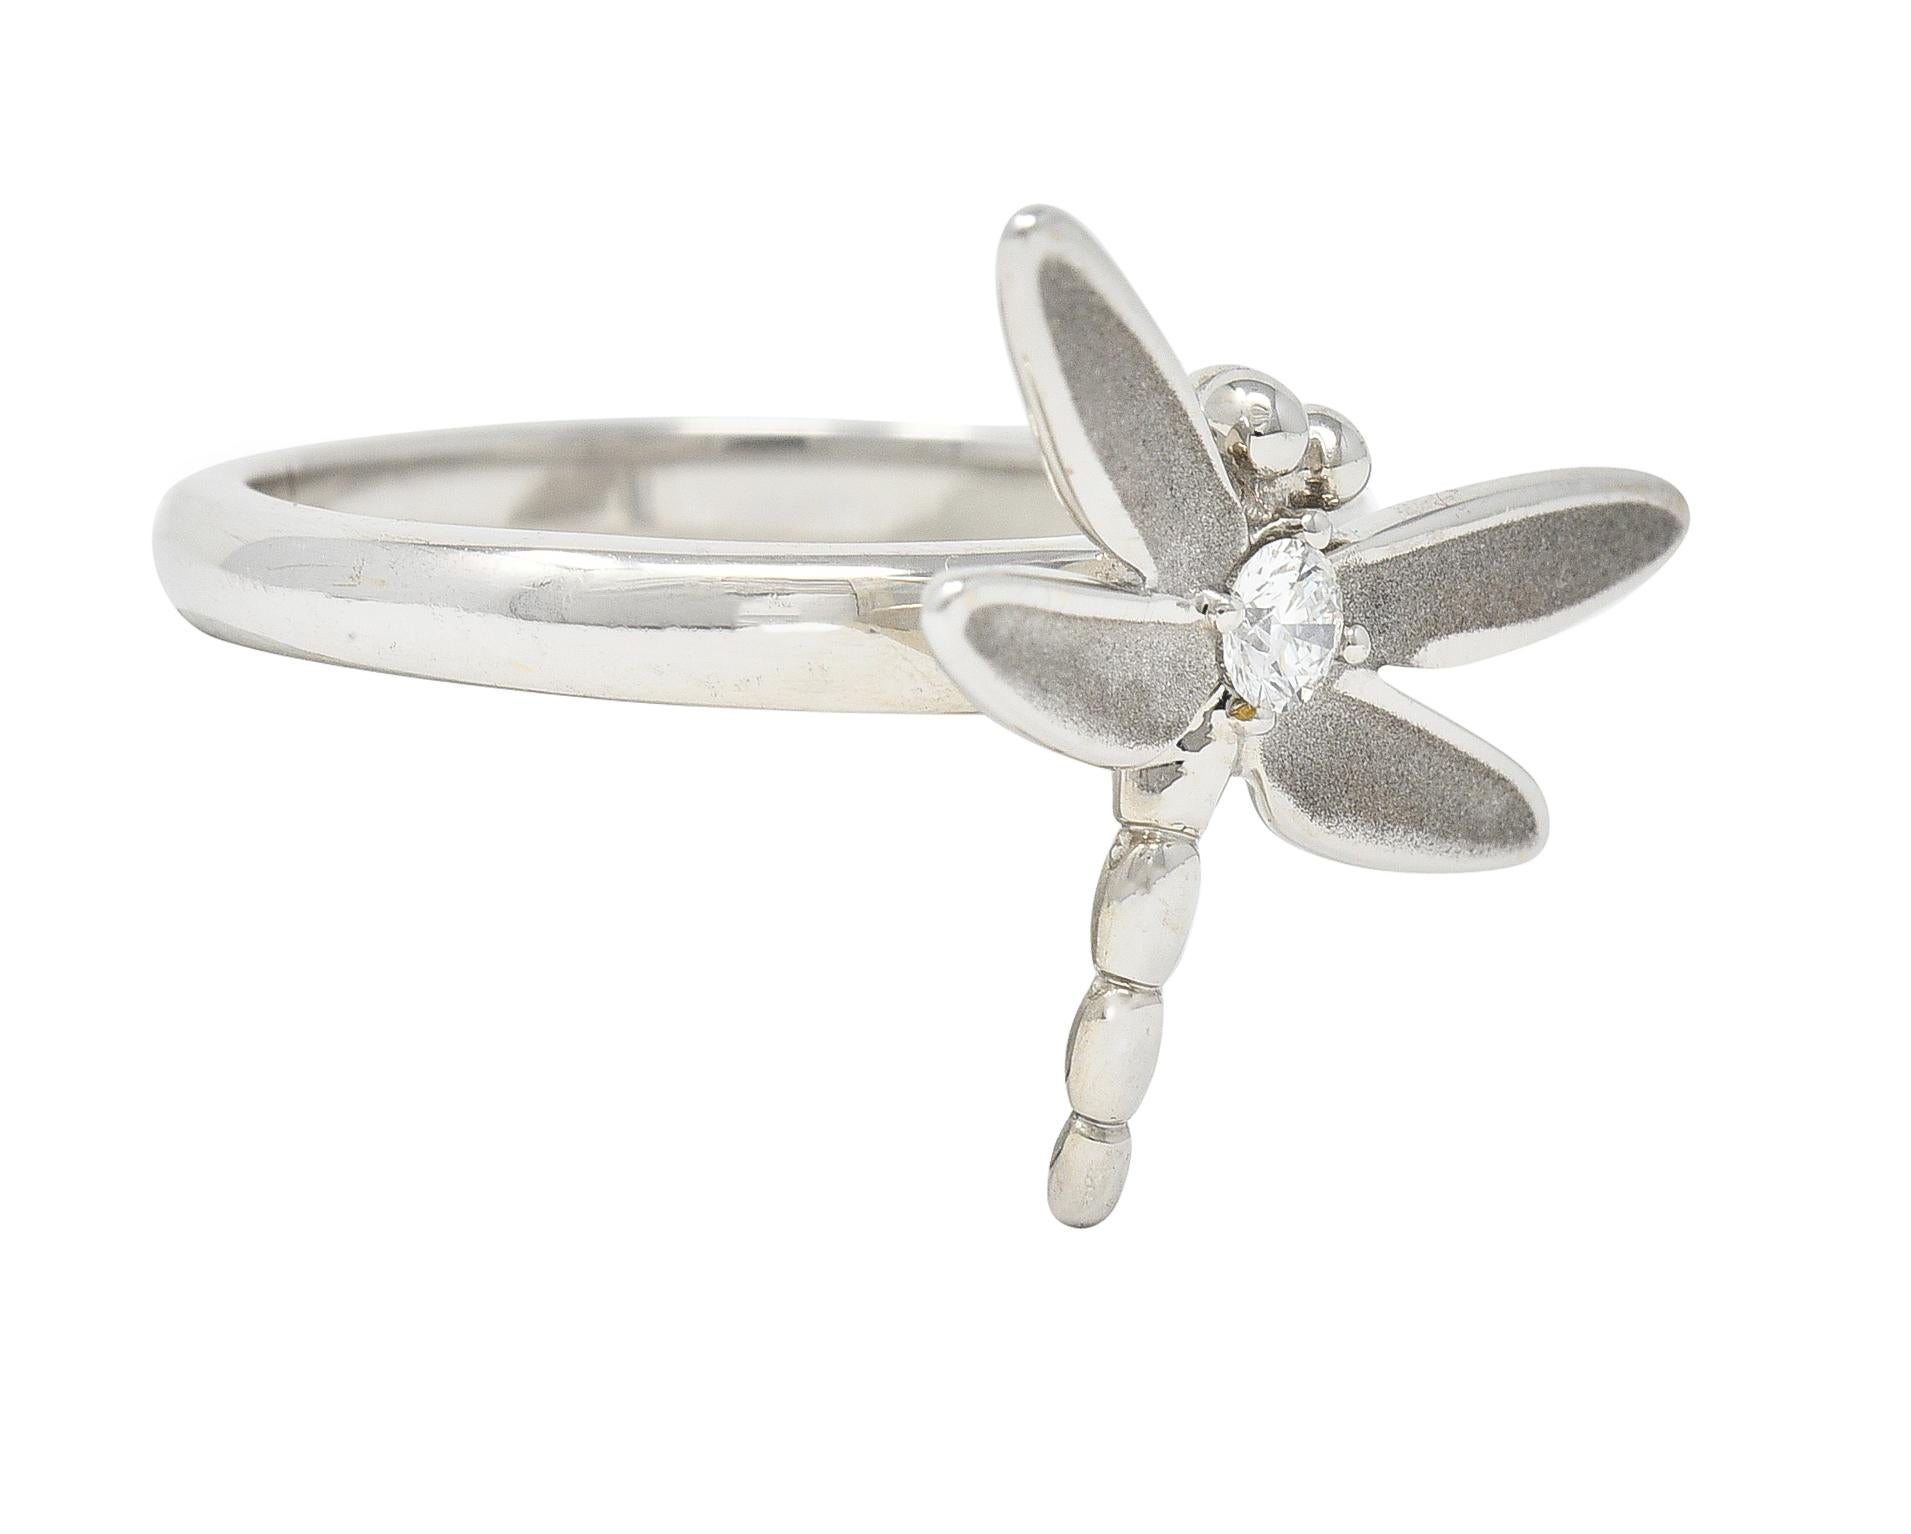 Designed as a stylized dragonfly with brushed matte wings, Centering a prong set round brilliant cut diamond. Weighing approximately 0.10 carat total. Eye clean and bright. With high polish finish. Stamped 750 for 18 karat gold. Fully signed for